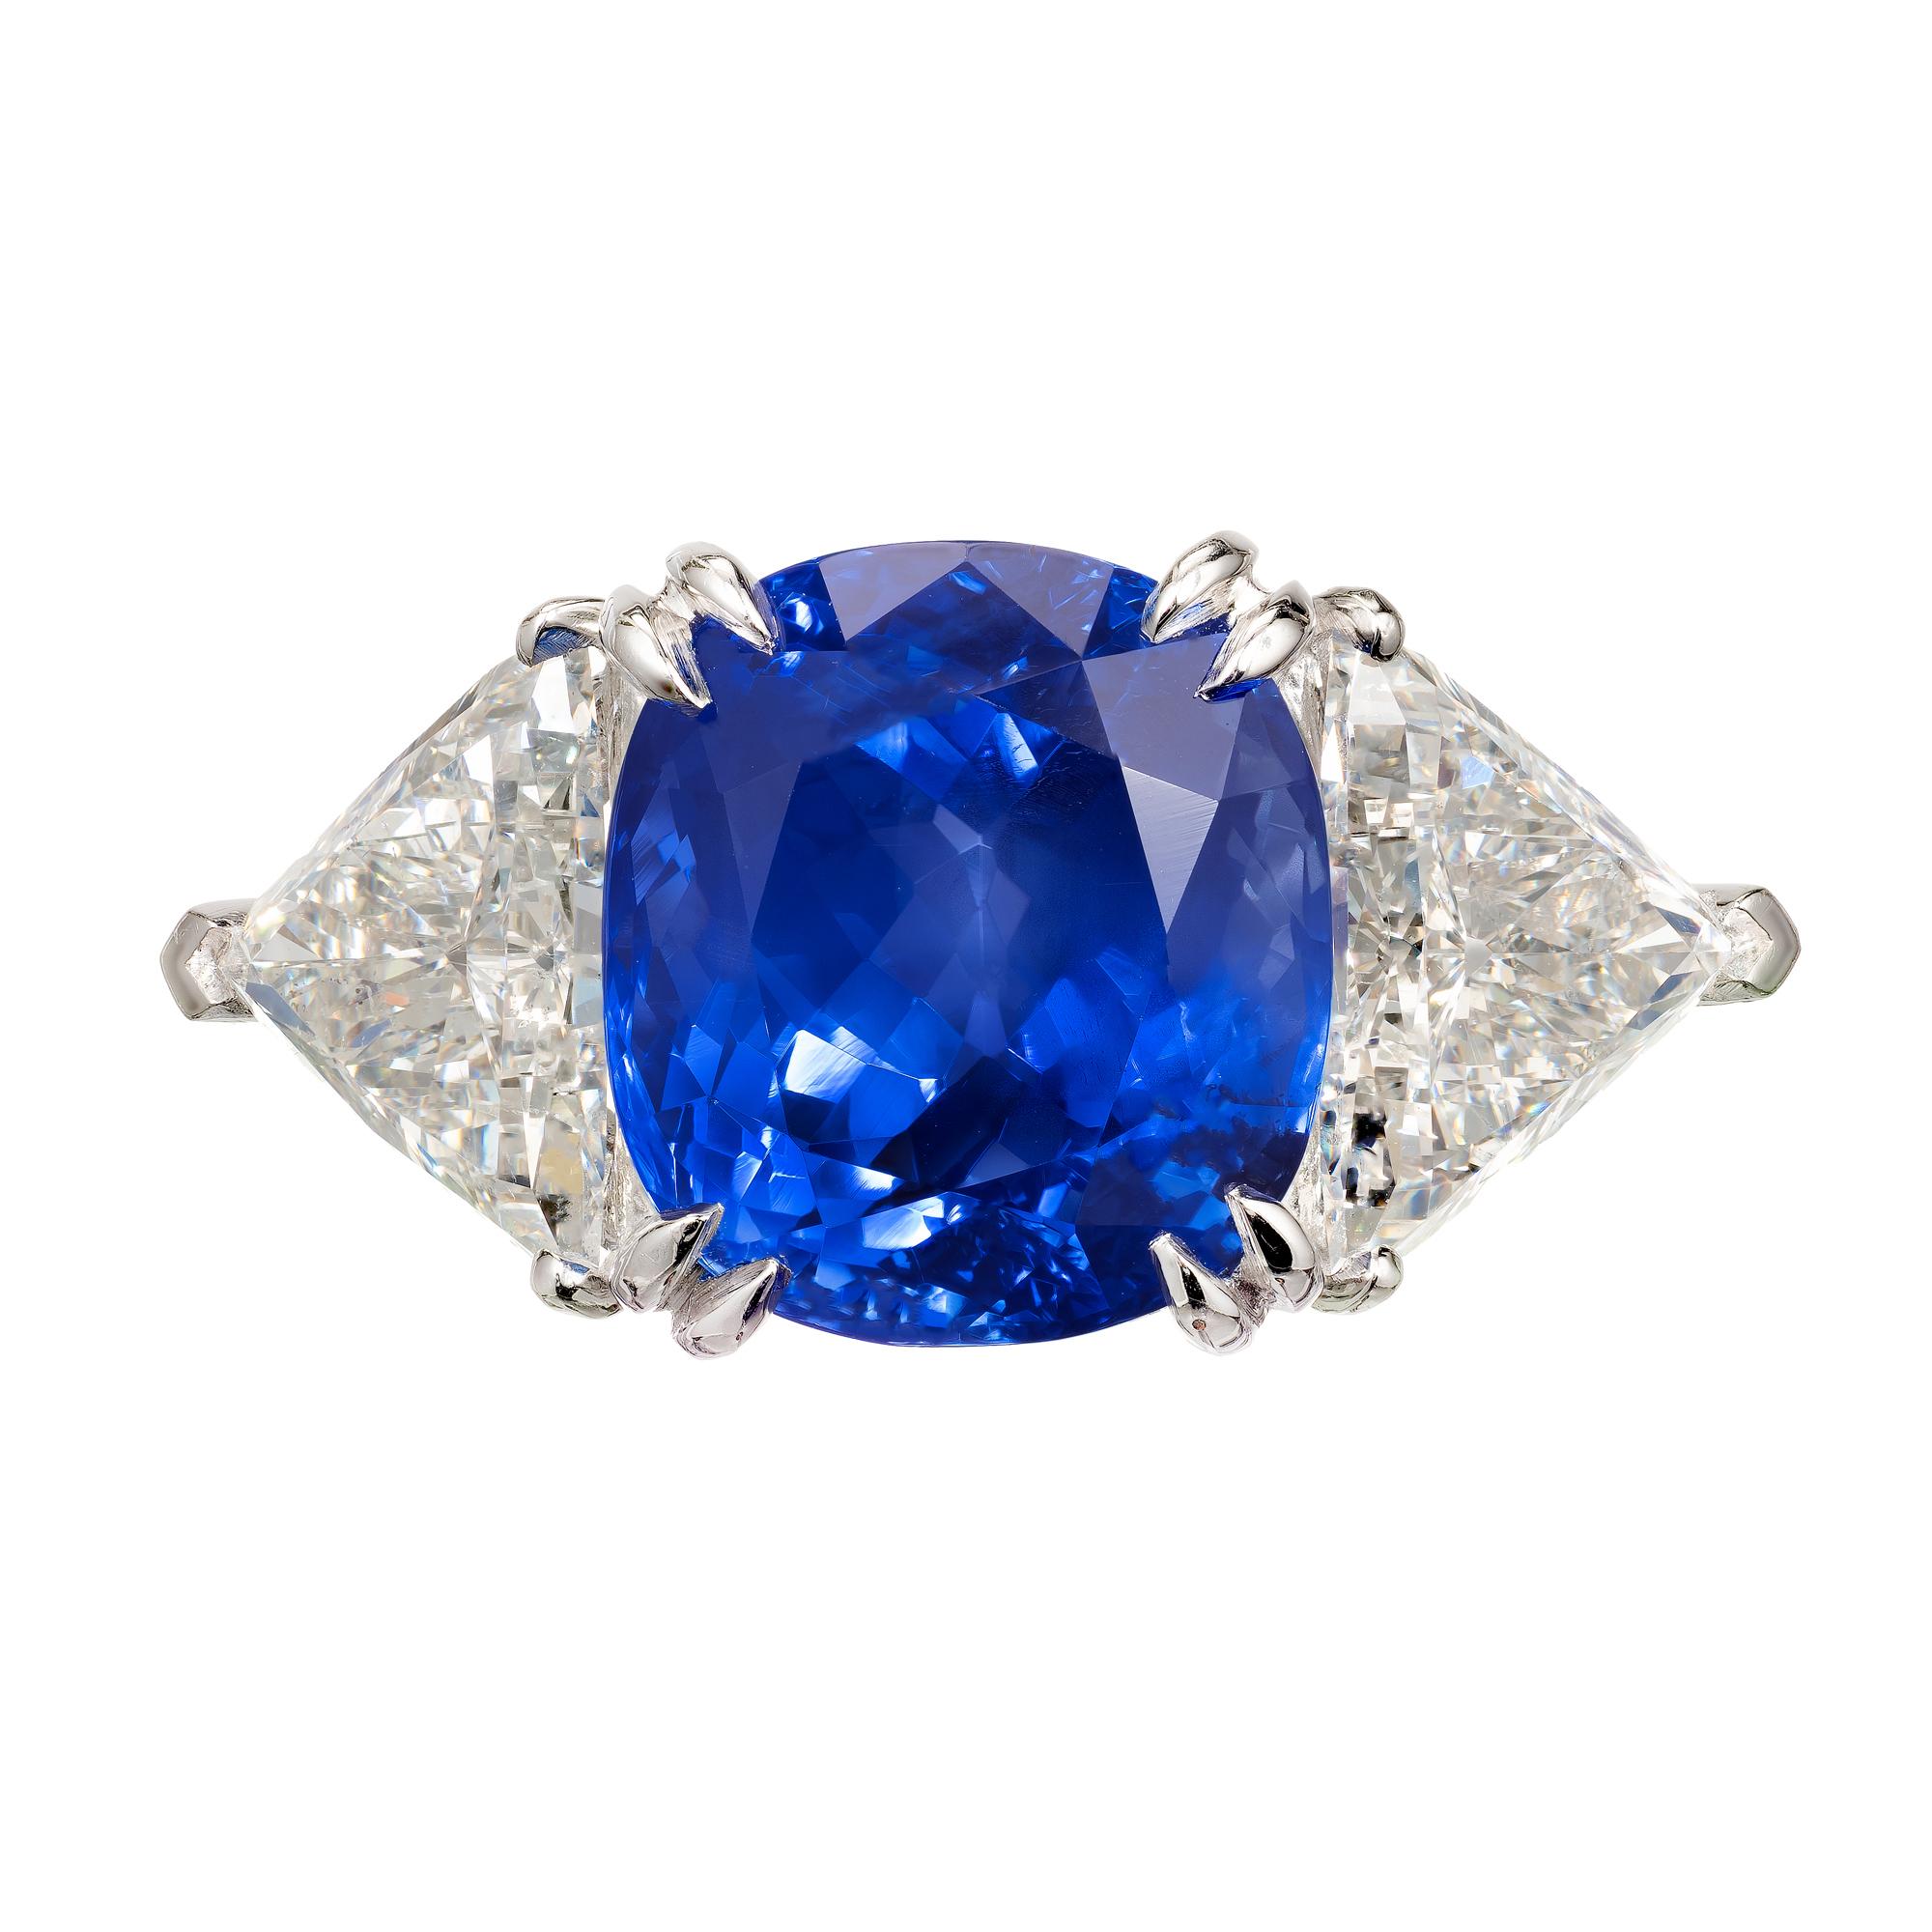 Sapphire and diamond three-stone engagement ring. Original natural GIA certified no heat cushion cut Sri Lanka Ceylon fine bright blue 9.44ct Sapphire Well-polished center stone. Matched with 2 triangular brilliant cut diamonds also GIA certified in